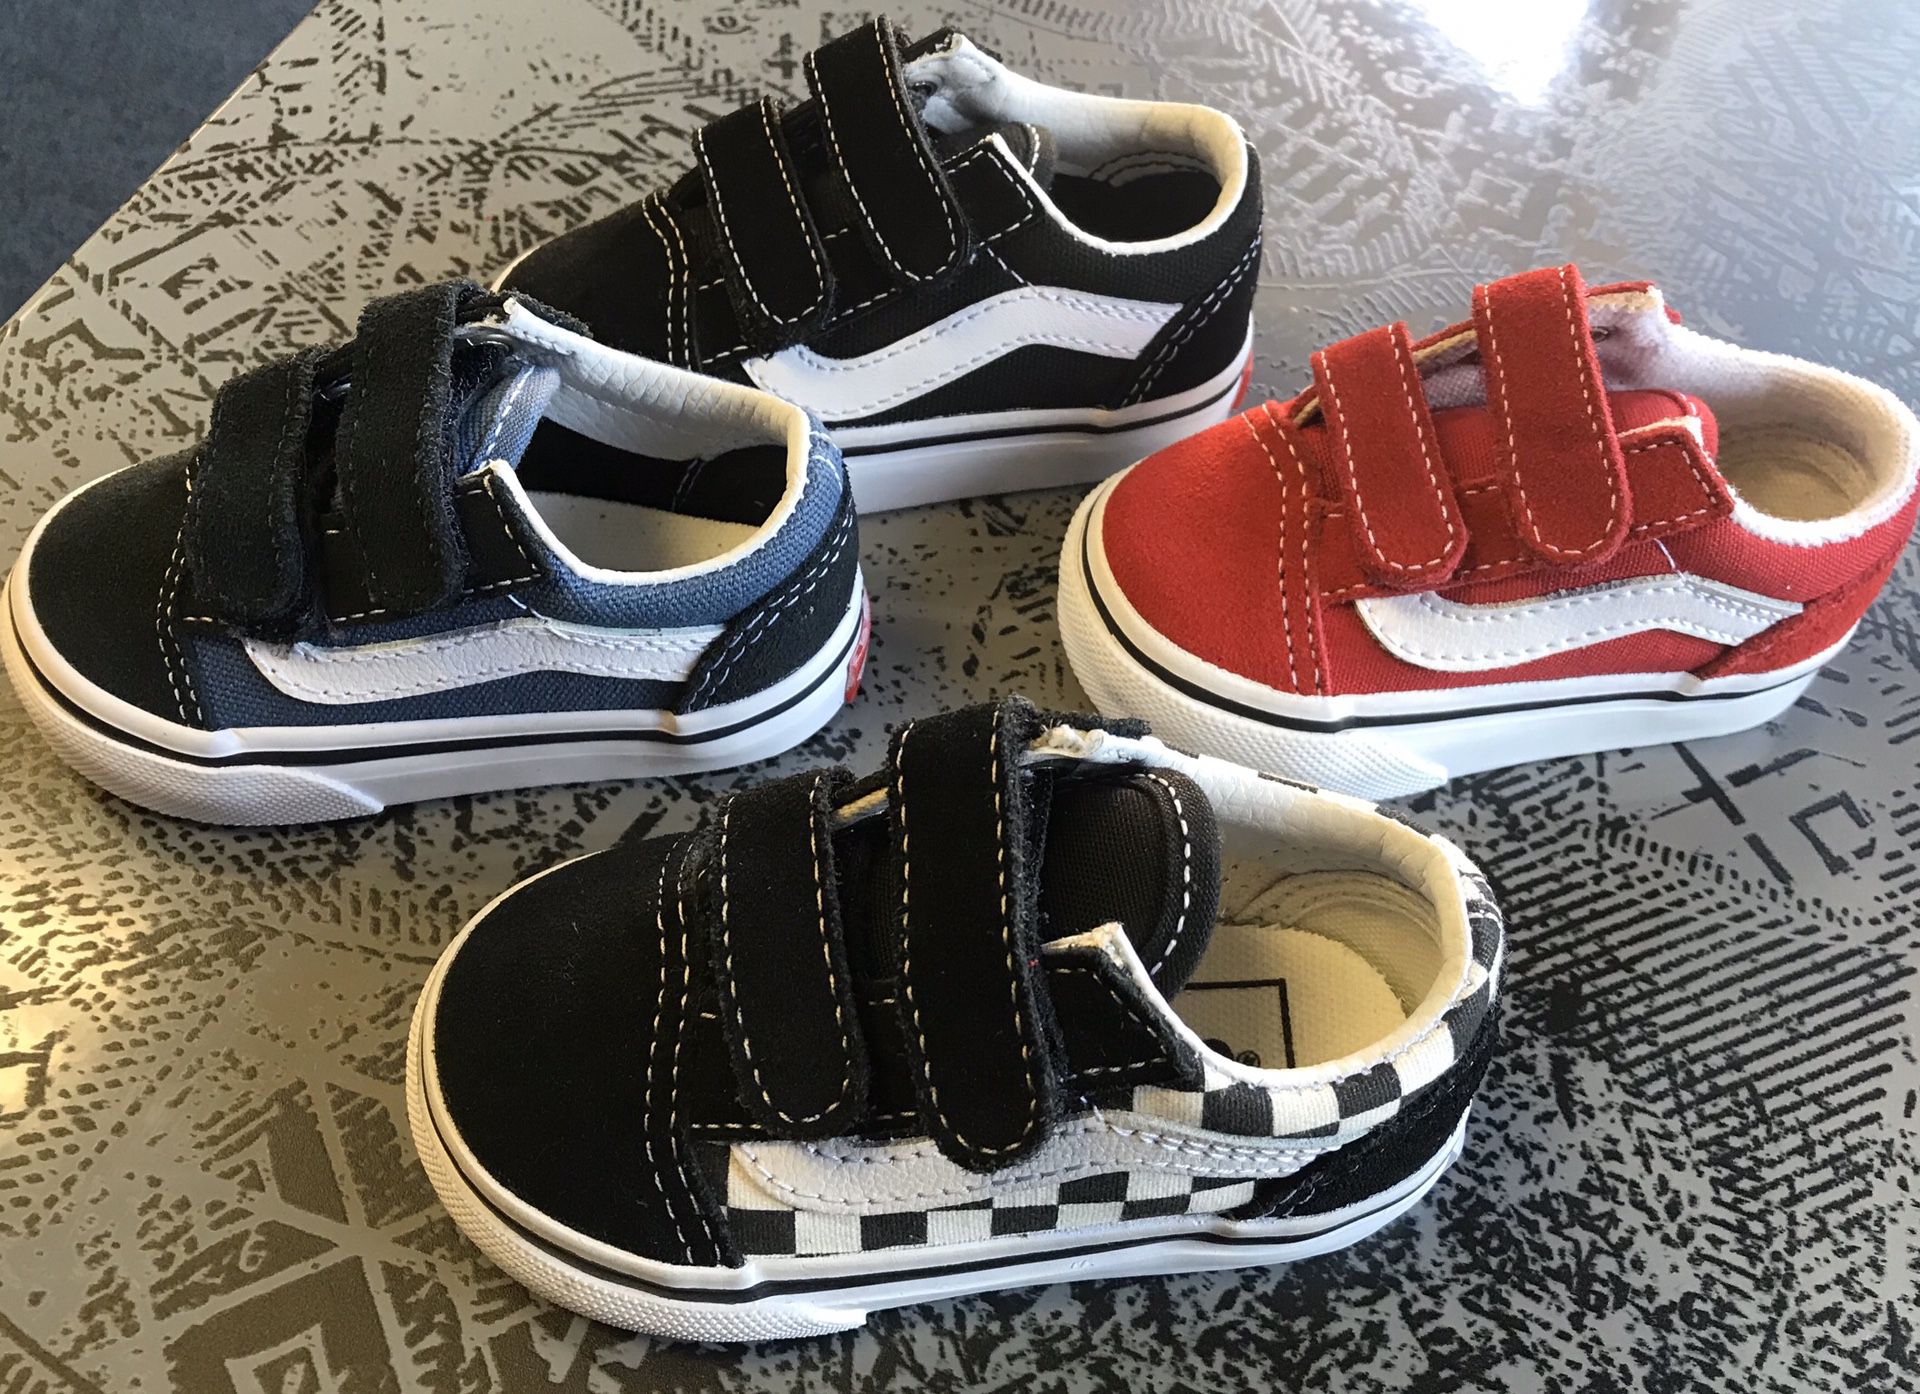 Baby toddler Vans Old Skool new with tags and box all sizes available at Spring Valley Swapmeet open Saturday Sunday